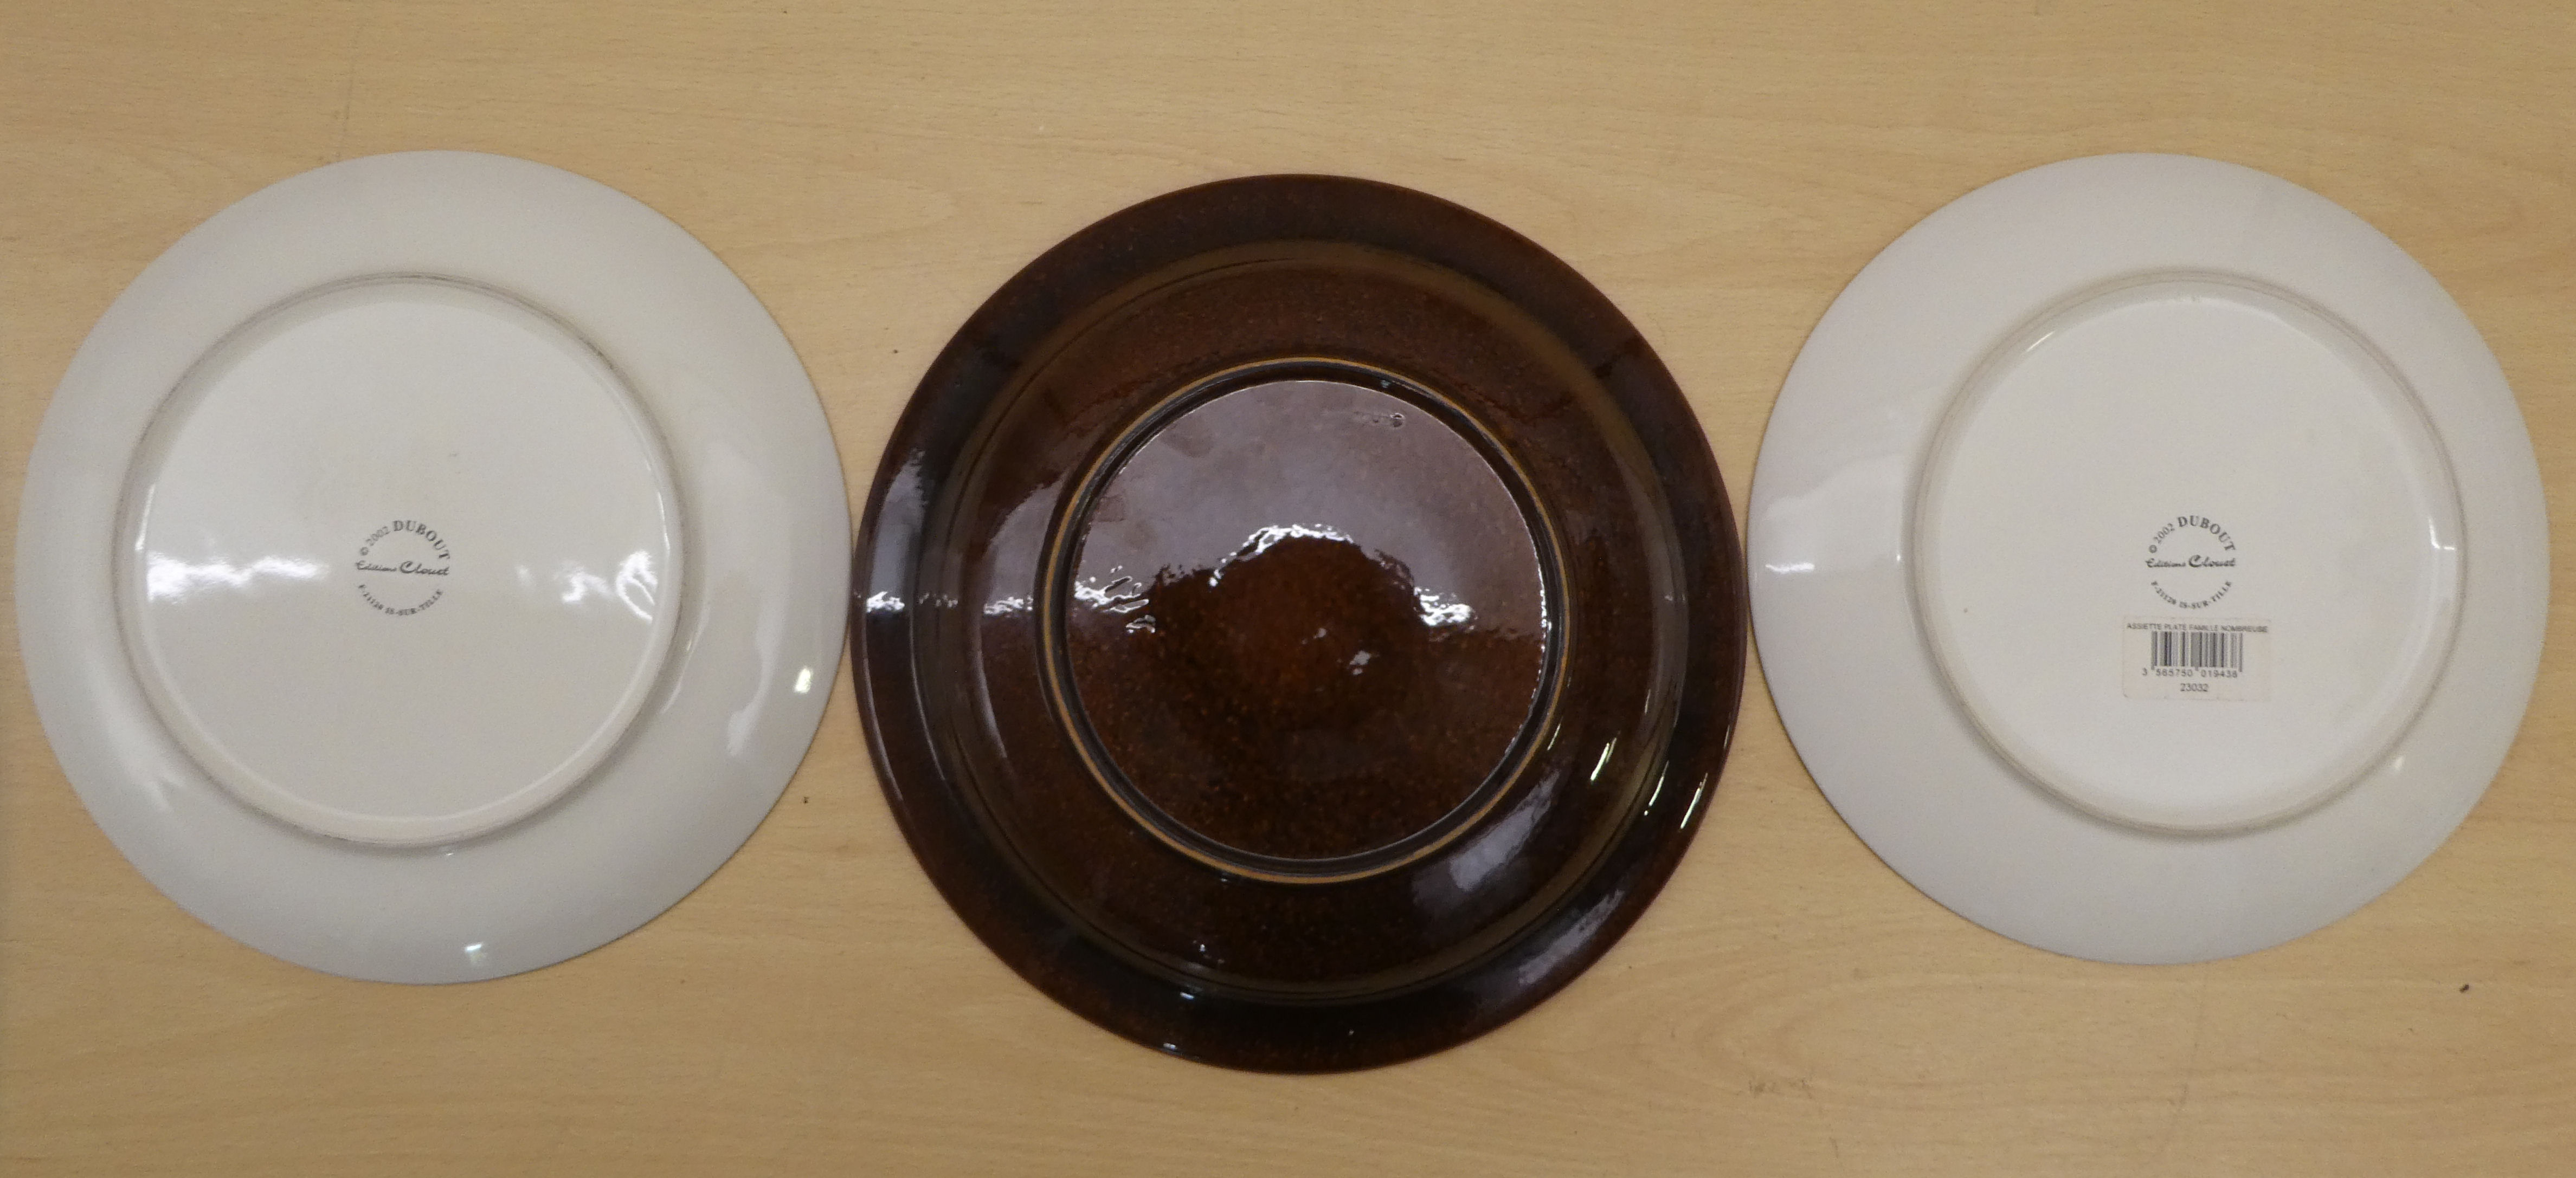 Mainly 20thC European ceramics: to include a Royal Copenhagen porcelain cup and saucer - Image 3 of 6